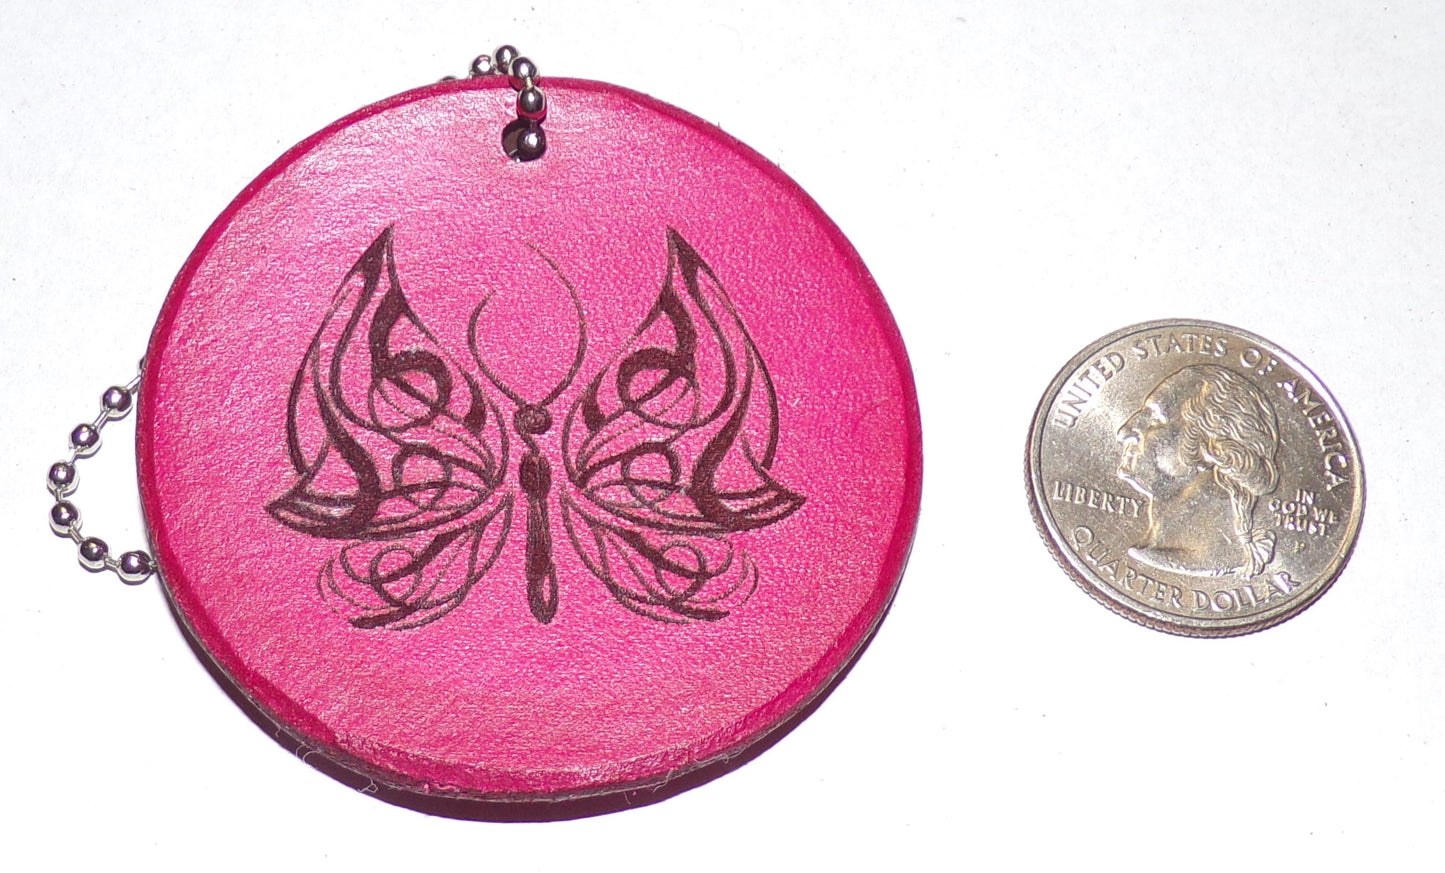 Butterfly Leather Bag Tag/Wall hanger Pink